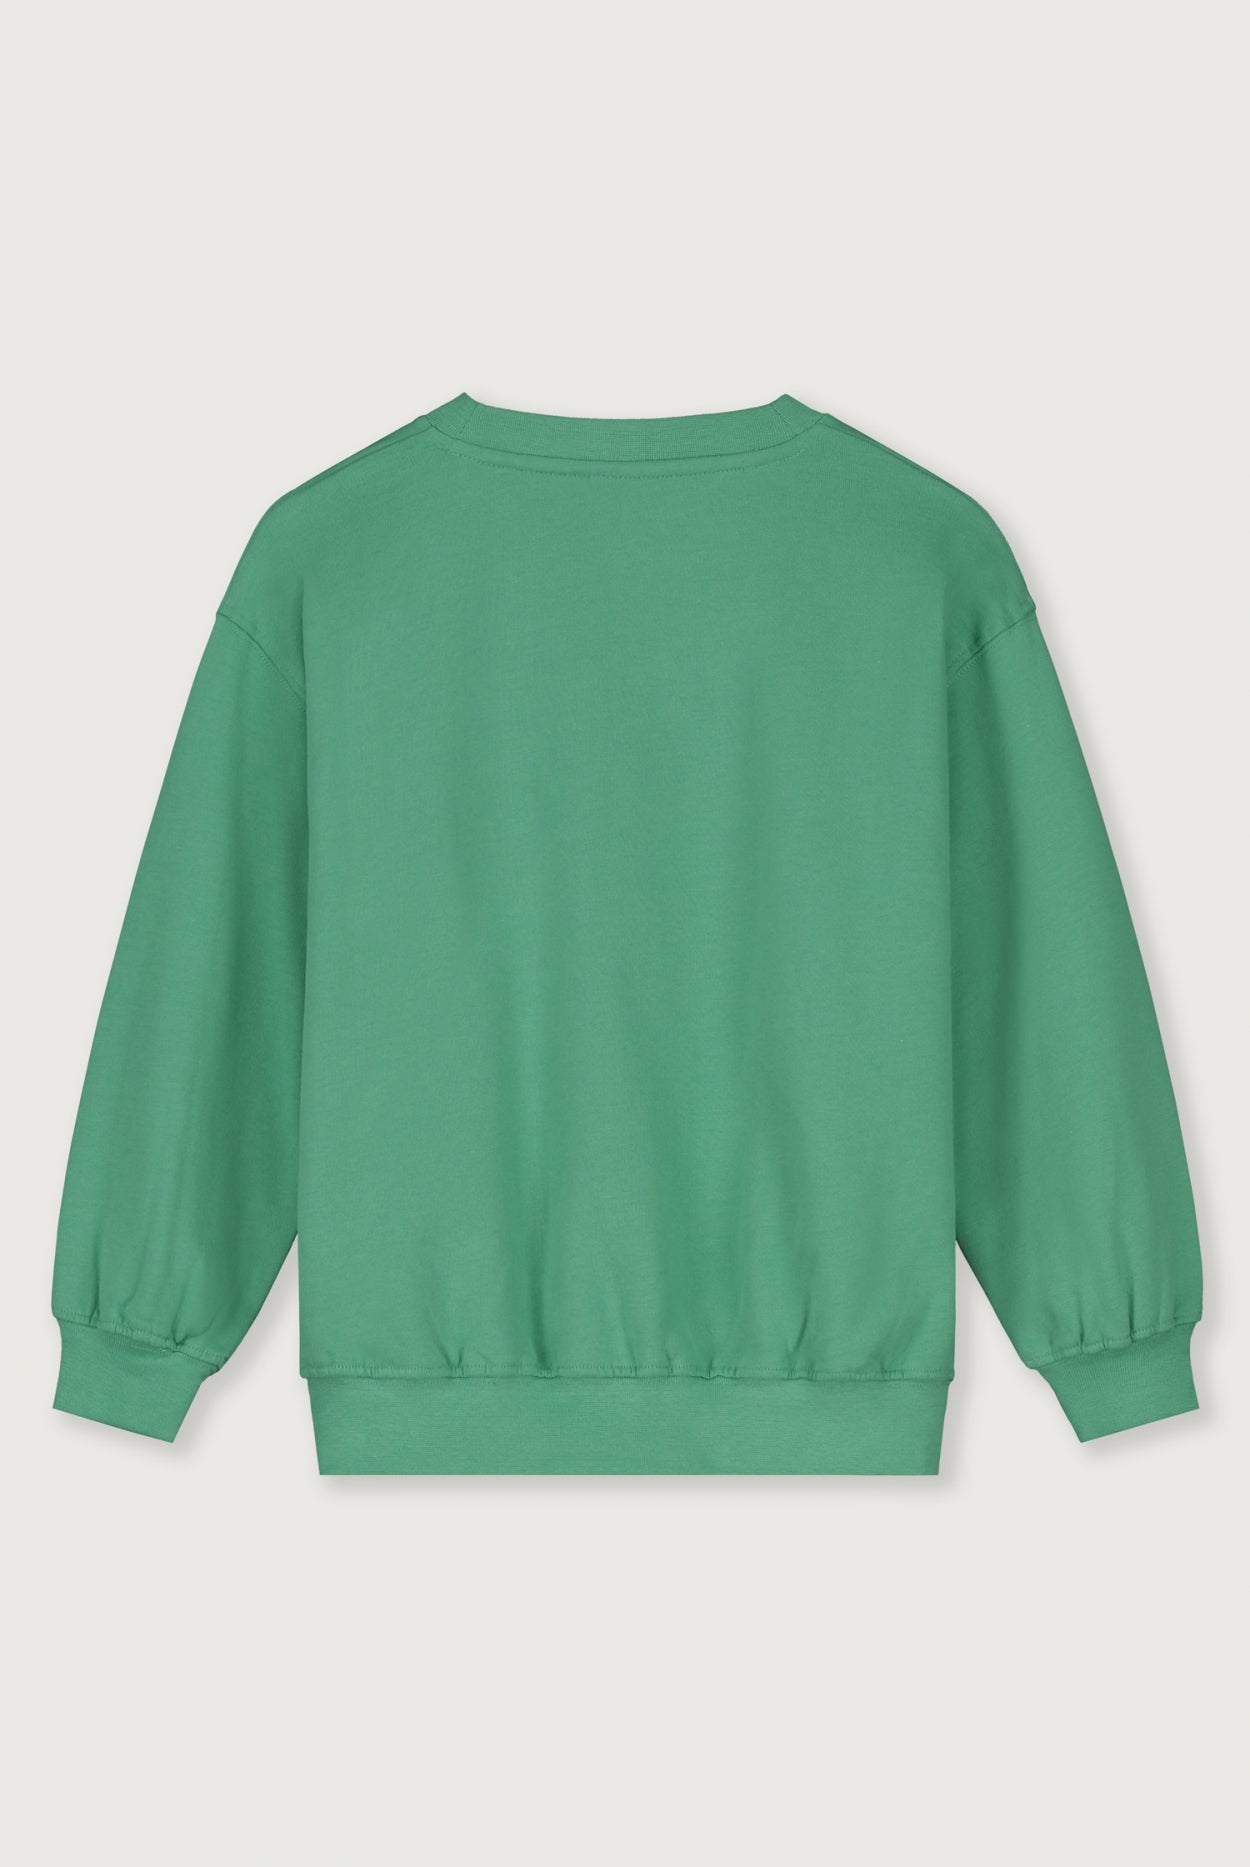 Dropped Shoulder Sweater Bright Green